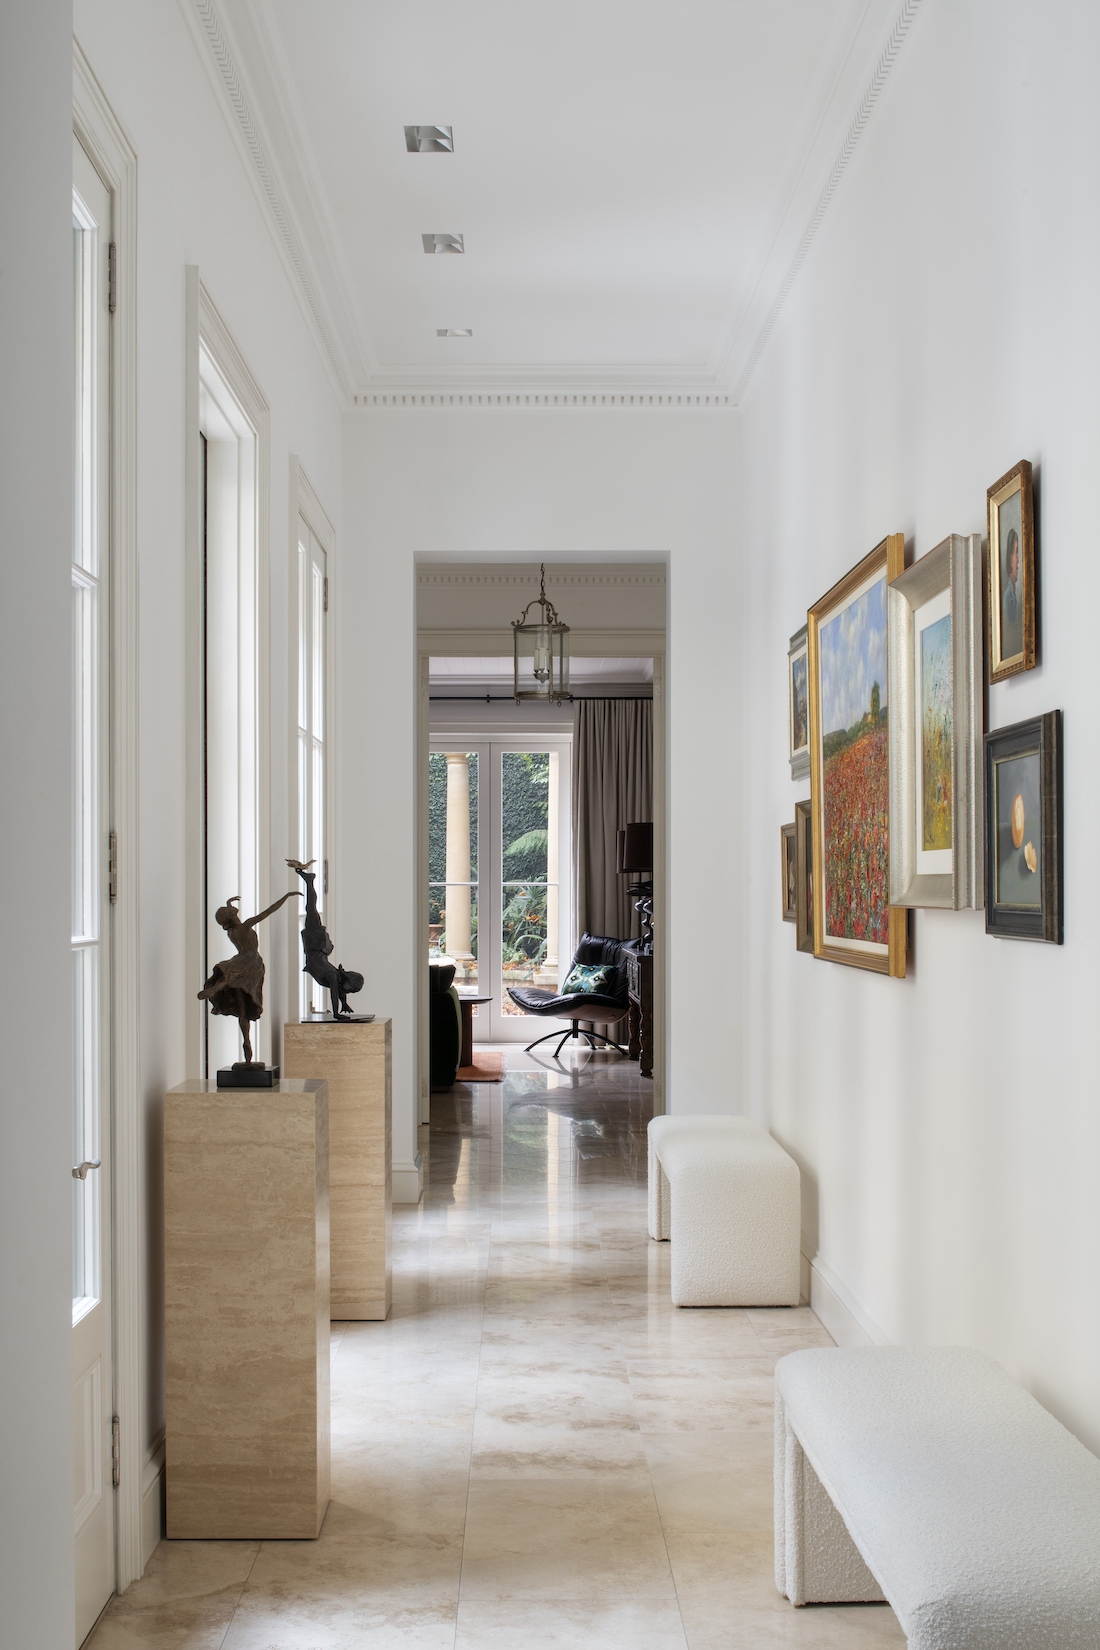 Transcontinental Residence hallway with collection of art